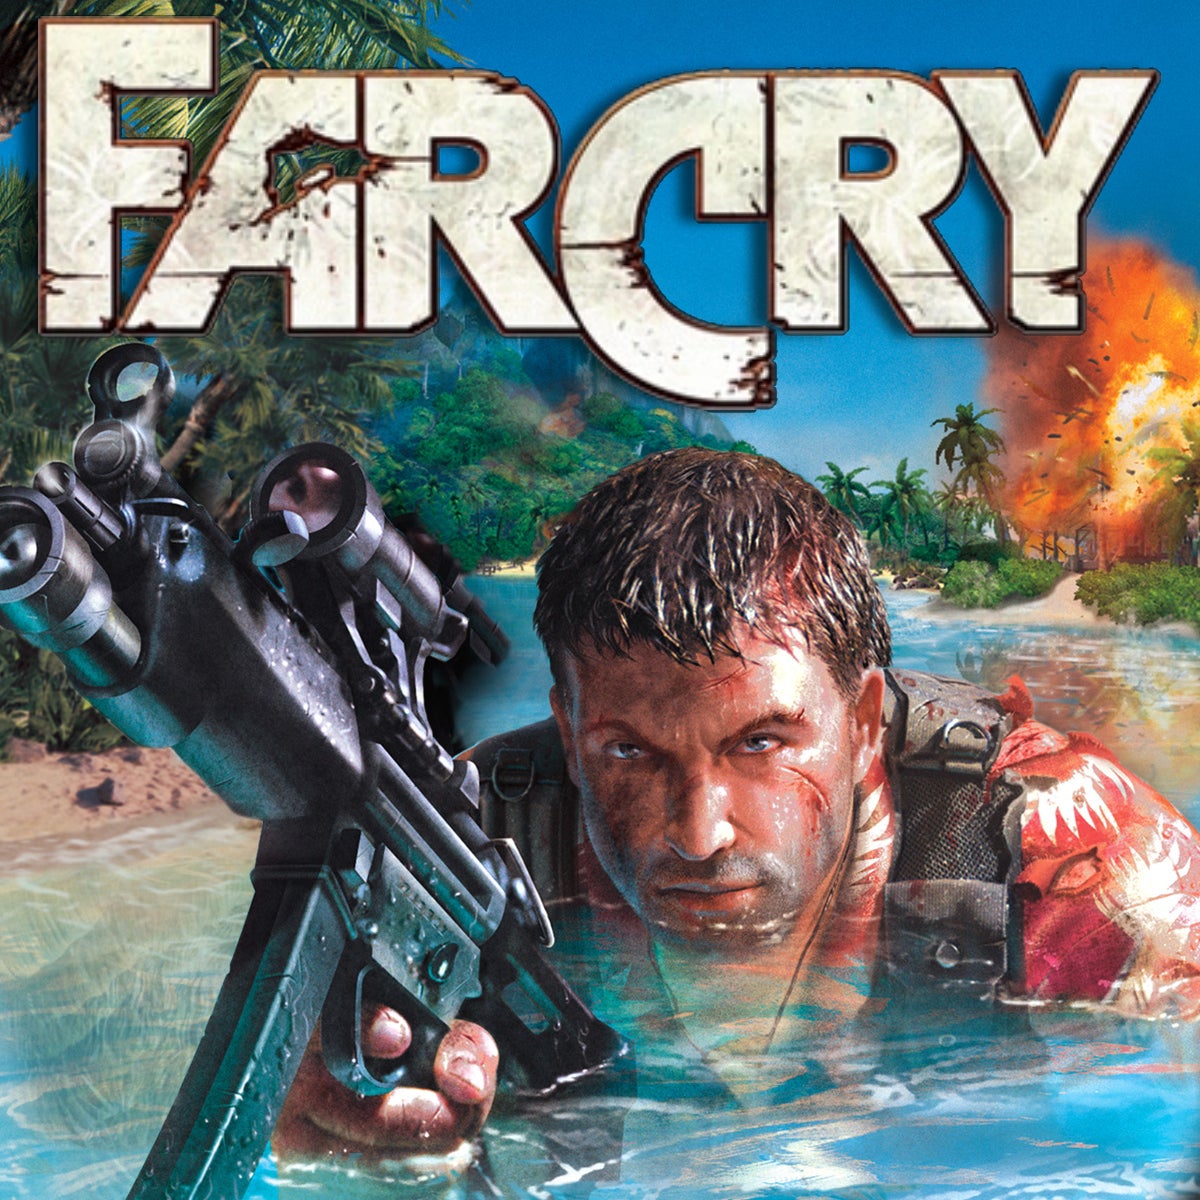 Far Cry 2004 Game Free Download Full Version